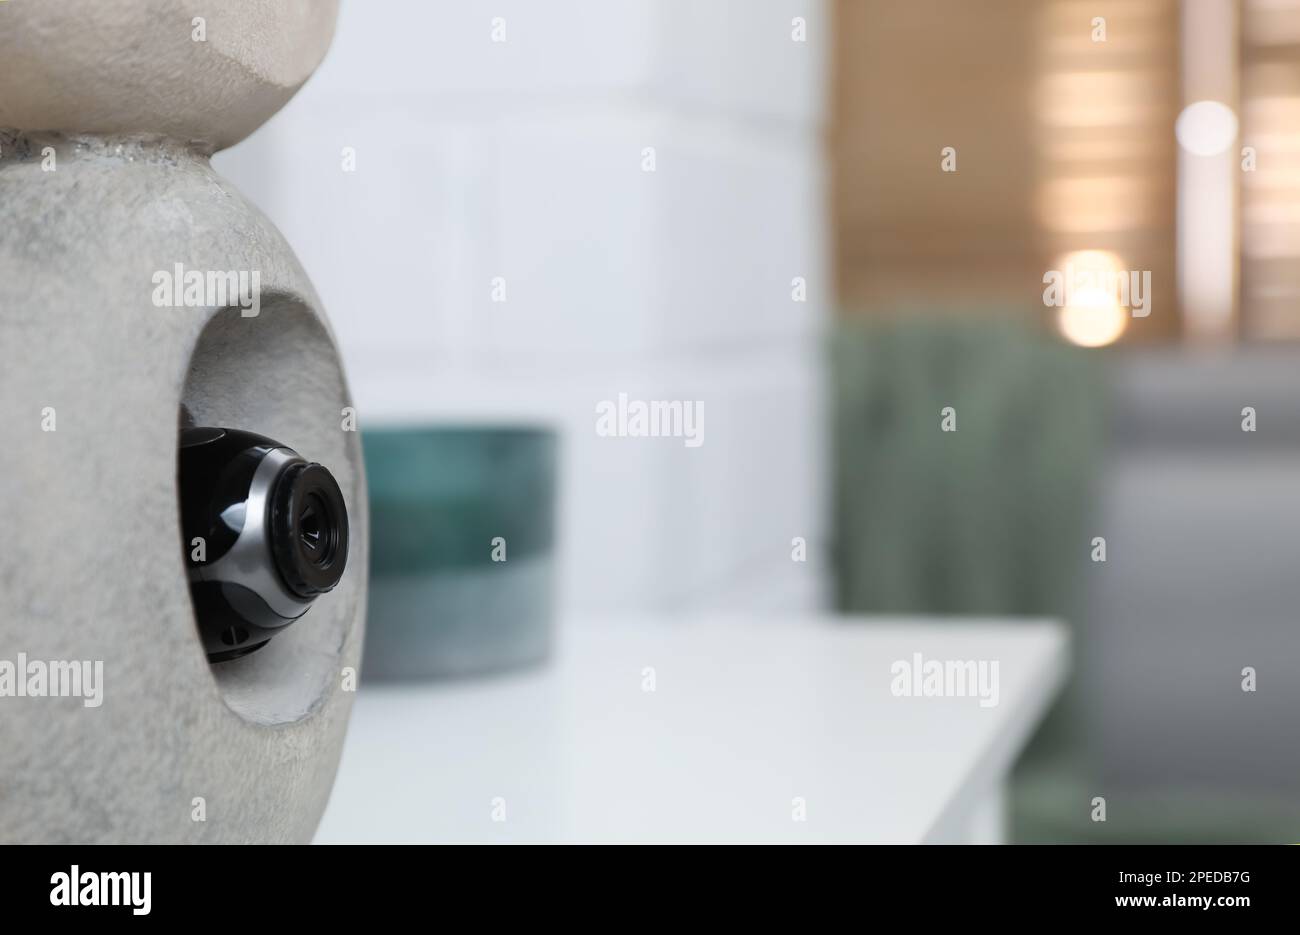 Statue with small hidden camera in room Stock Photo